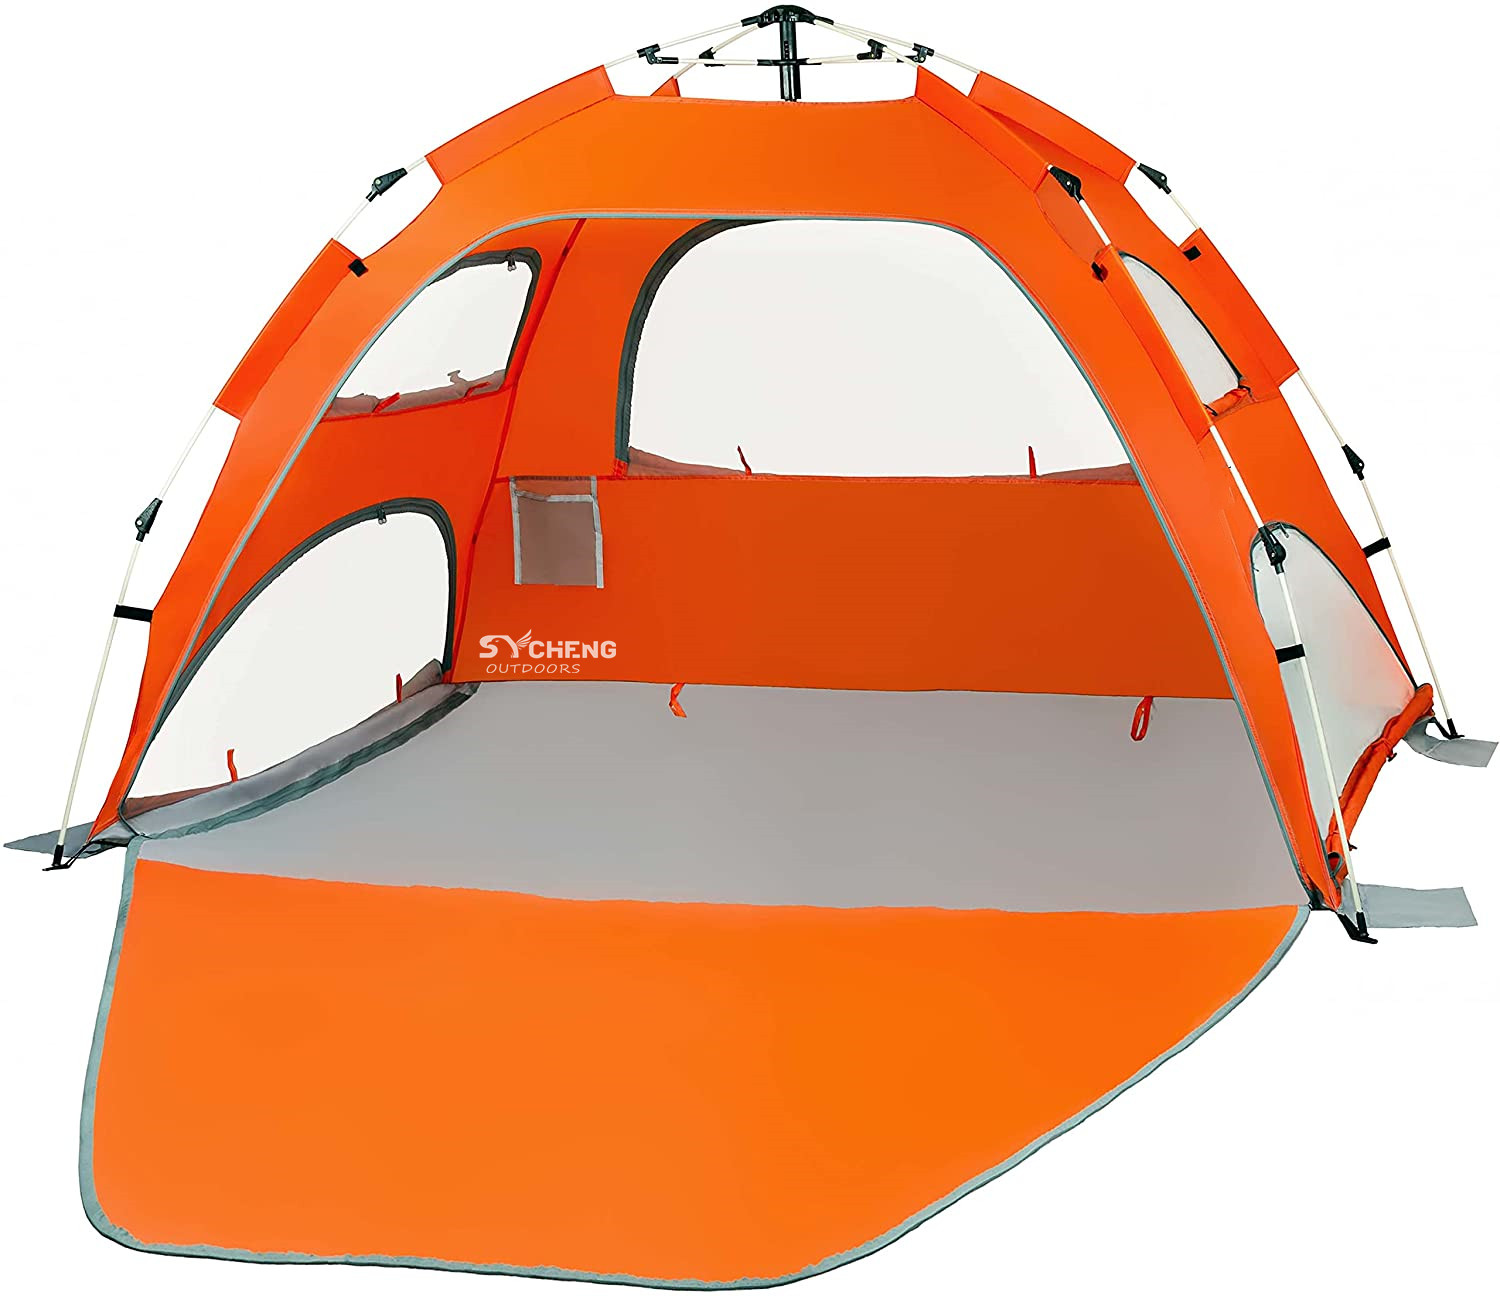 SYCHENG Hot selling can accept customized portable sunscreen beach tent to quickly and easily open the camping tent